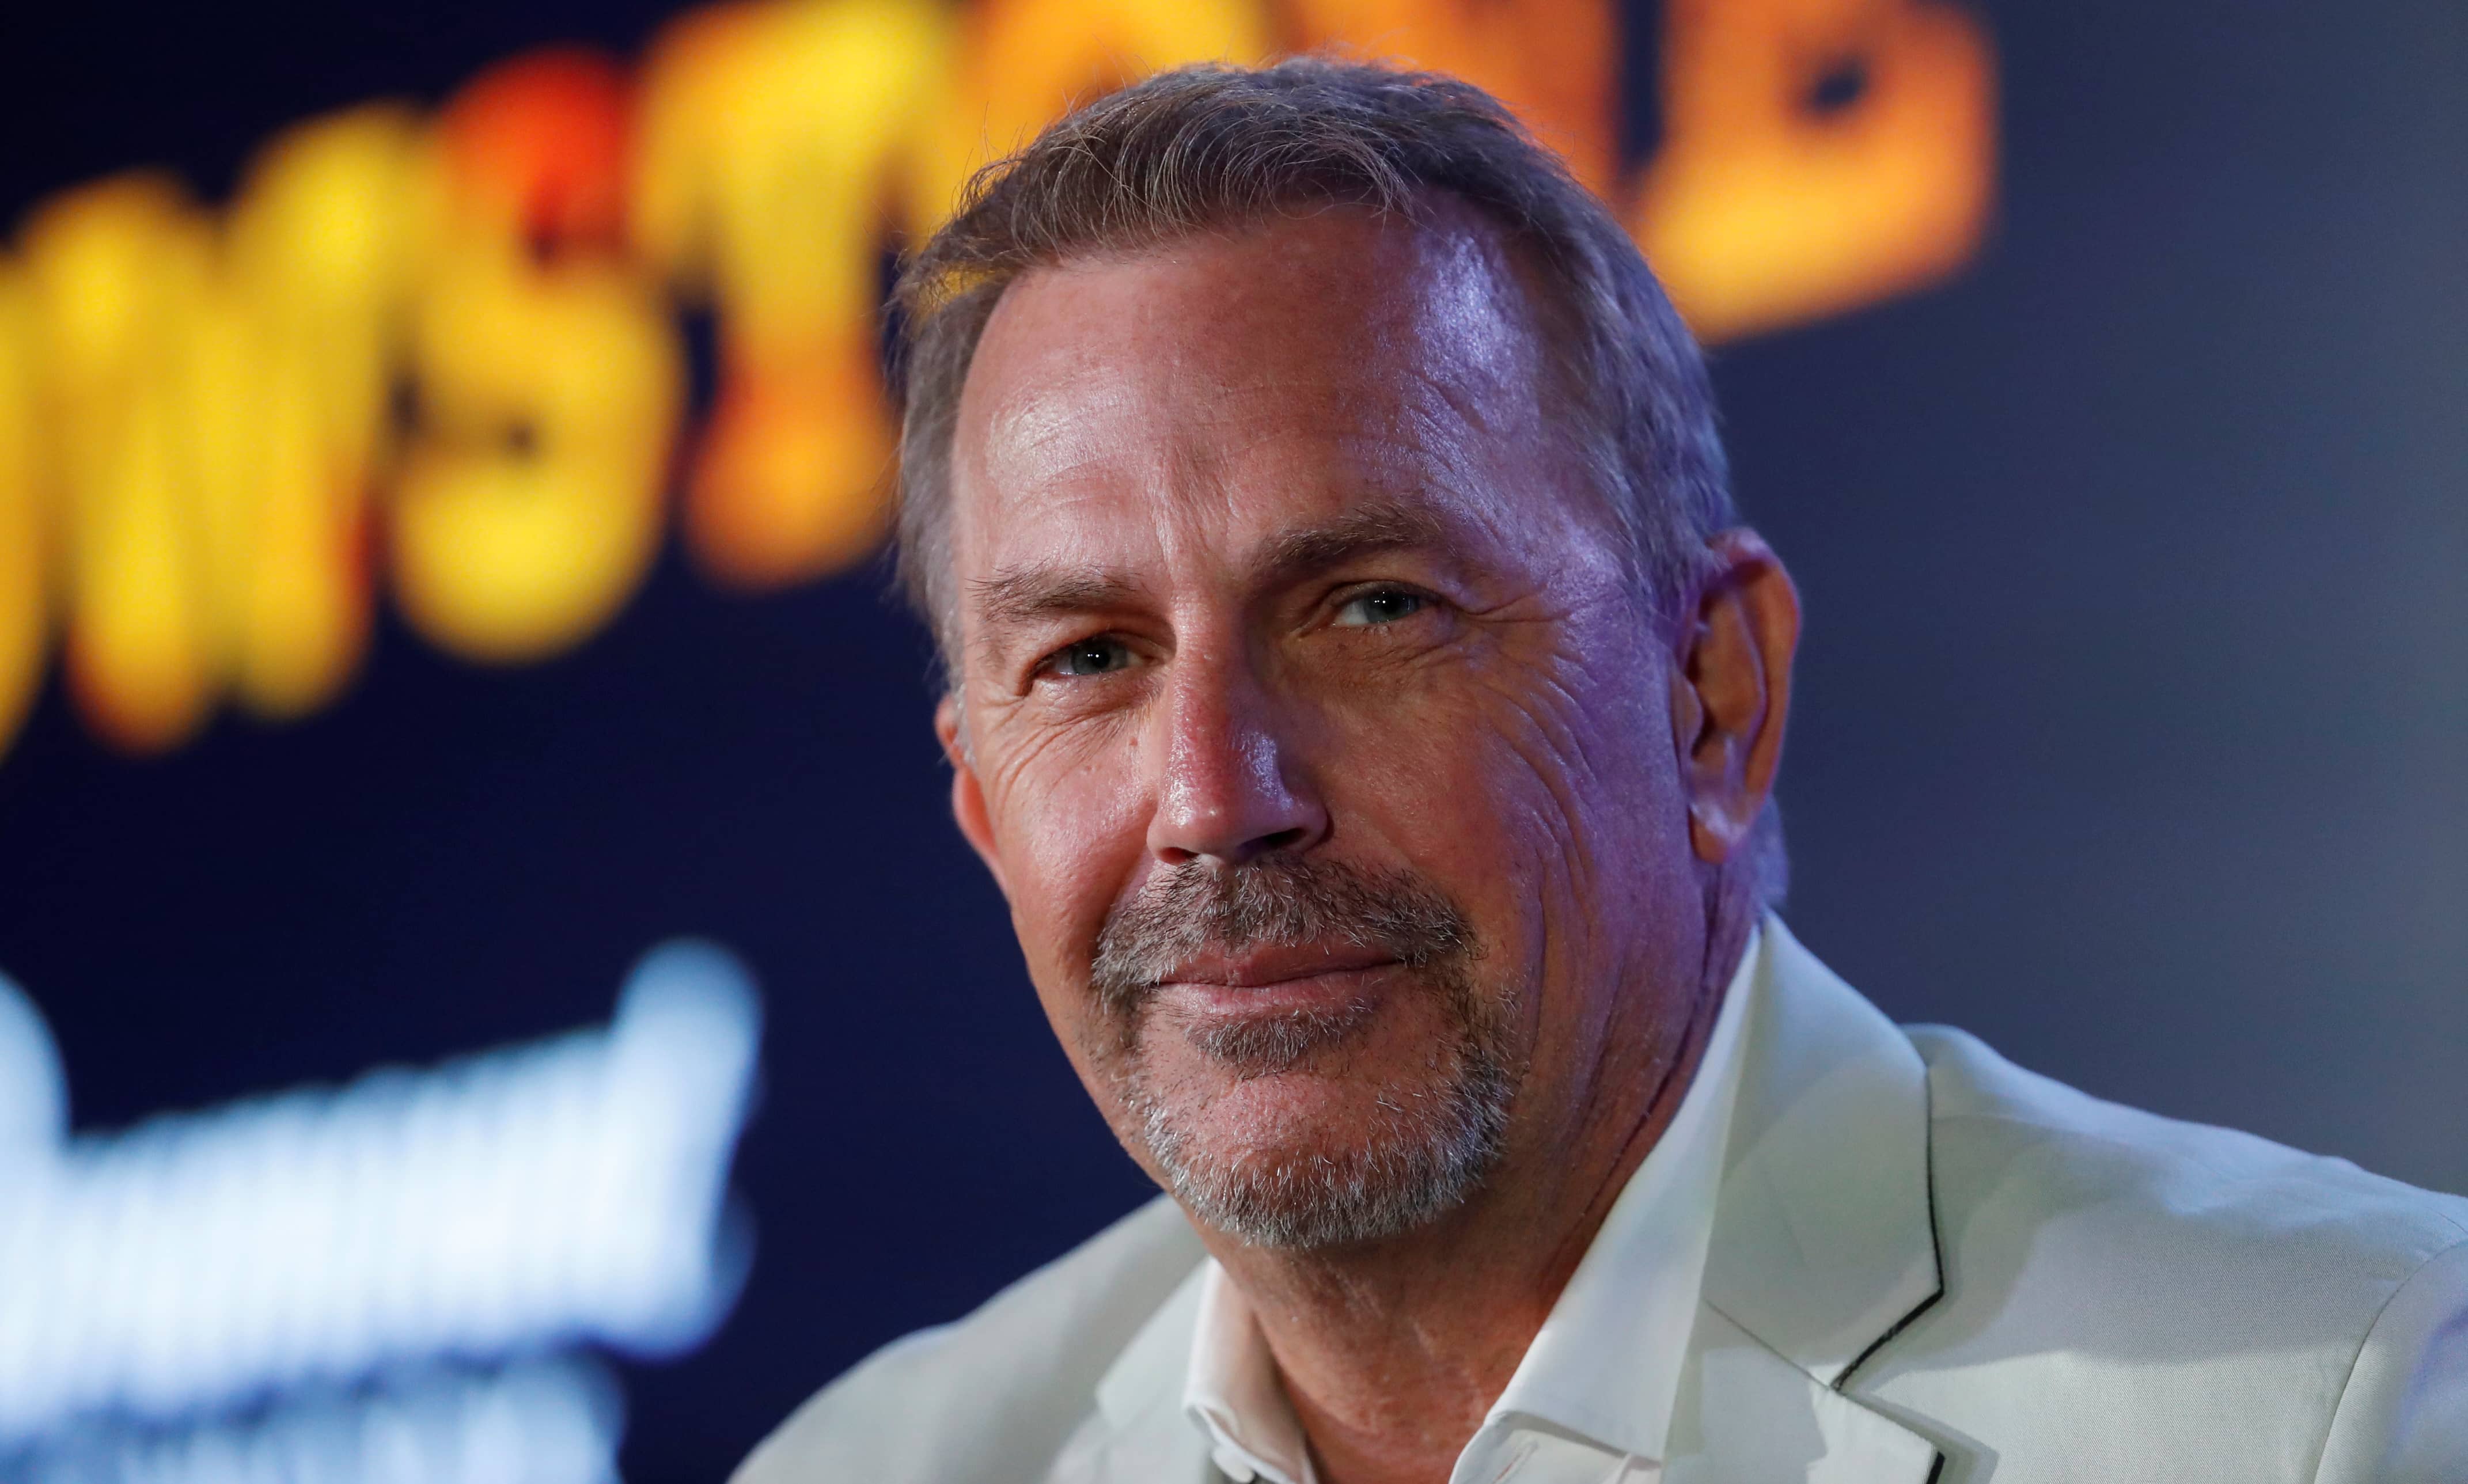 actor-kevin-costner-attends-a-conference-at-the-cannes-lions-international-festival-of-creativity-in-cannes